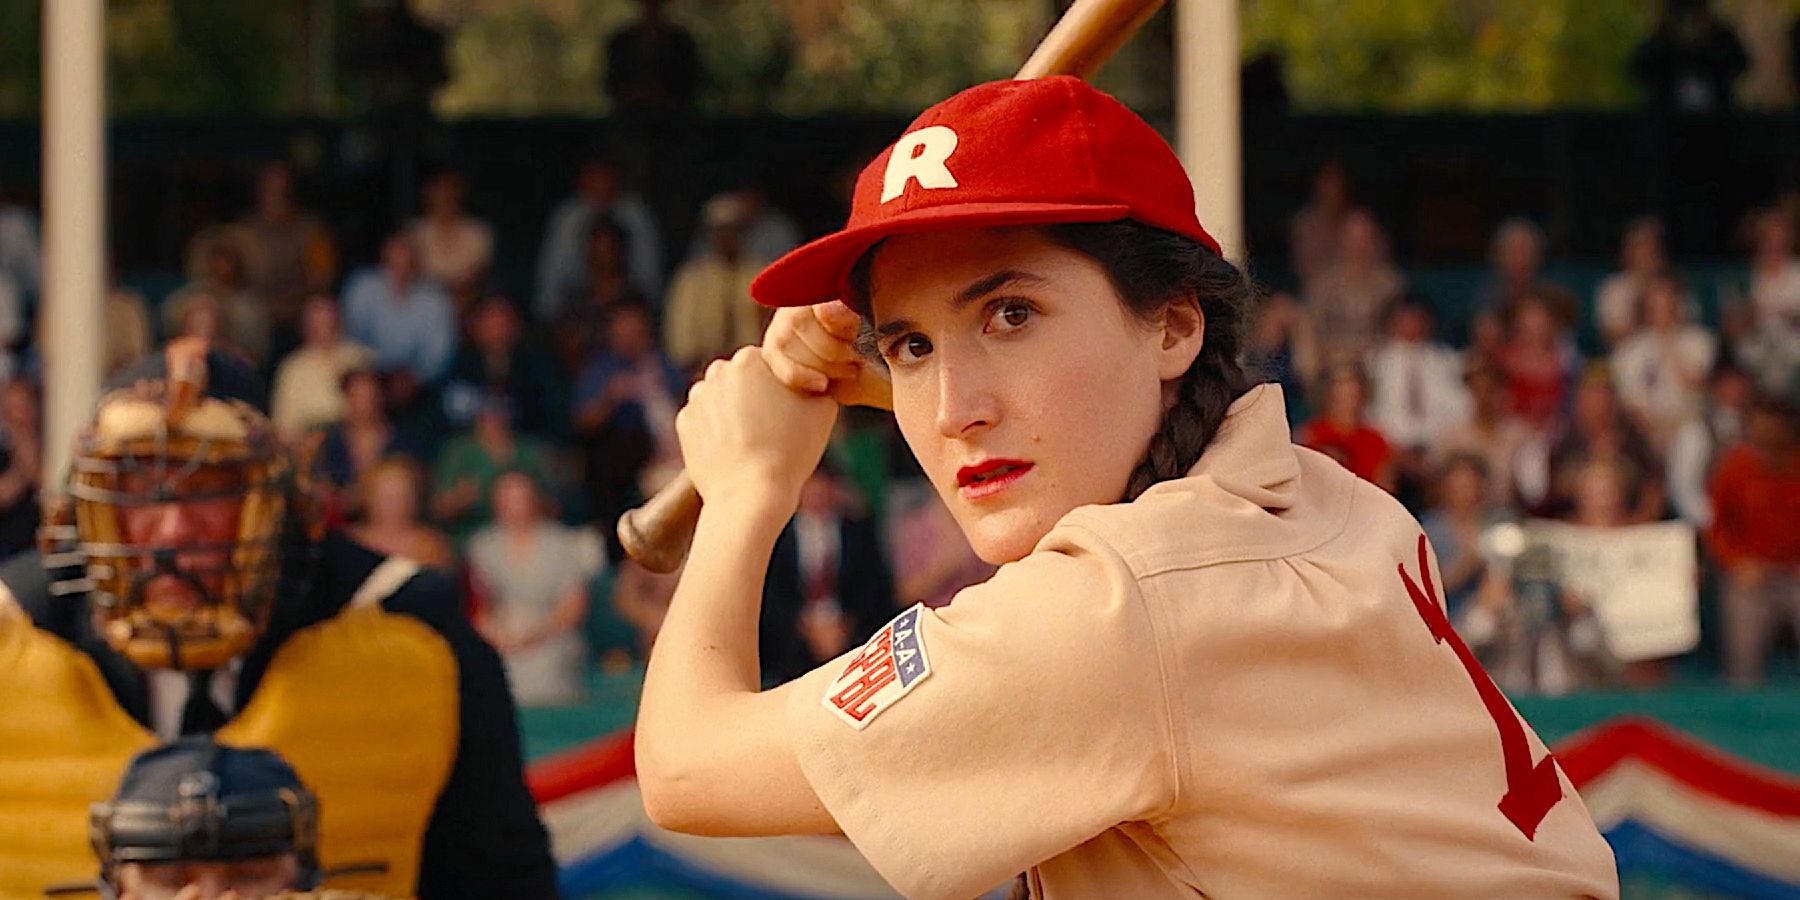 Shirley at bat in A League of Their Own Season 1 Episode 8